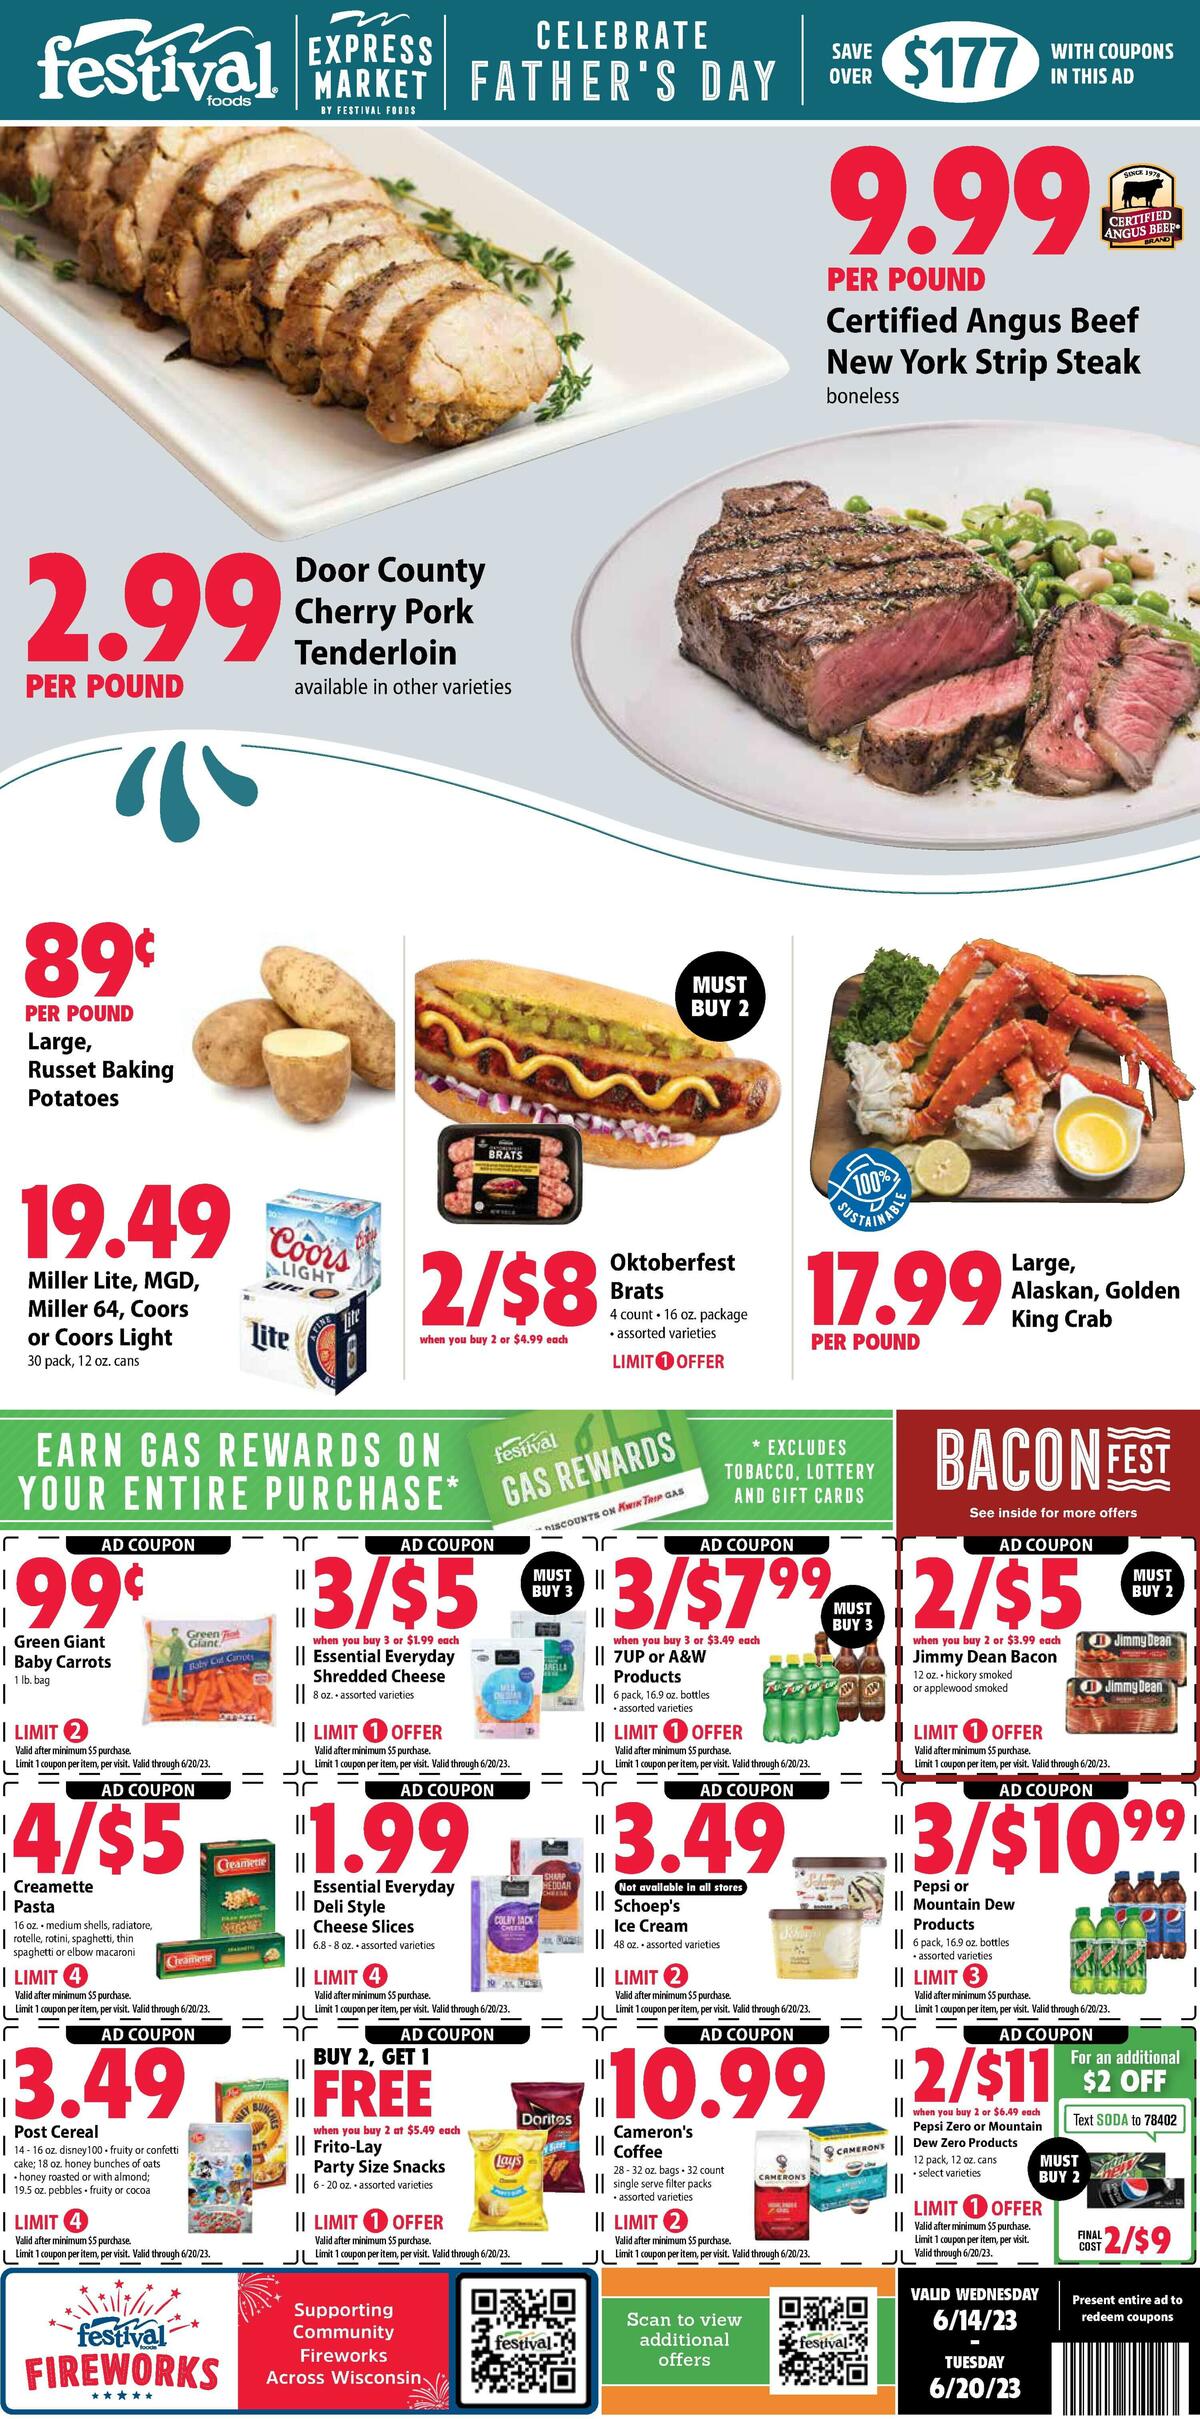 Festival Foods Weekly Ad & Specials from June 14